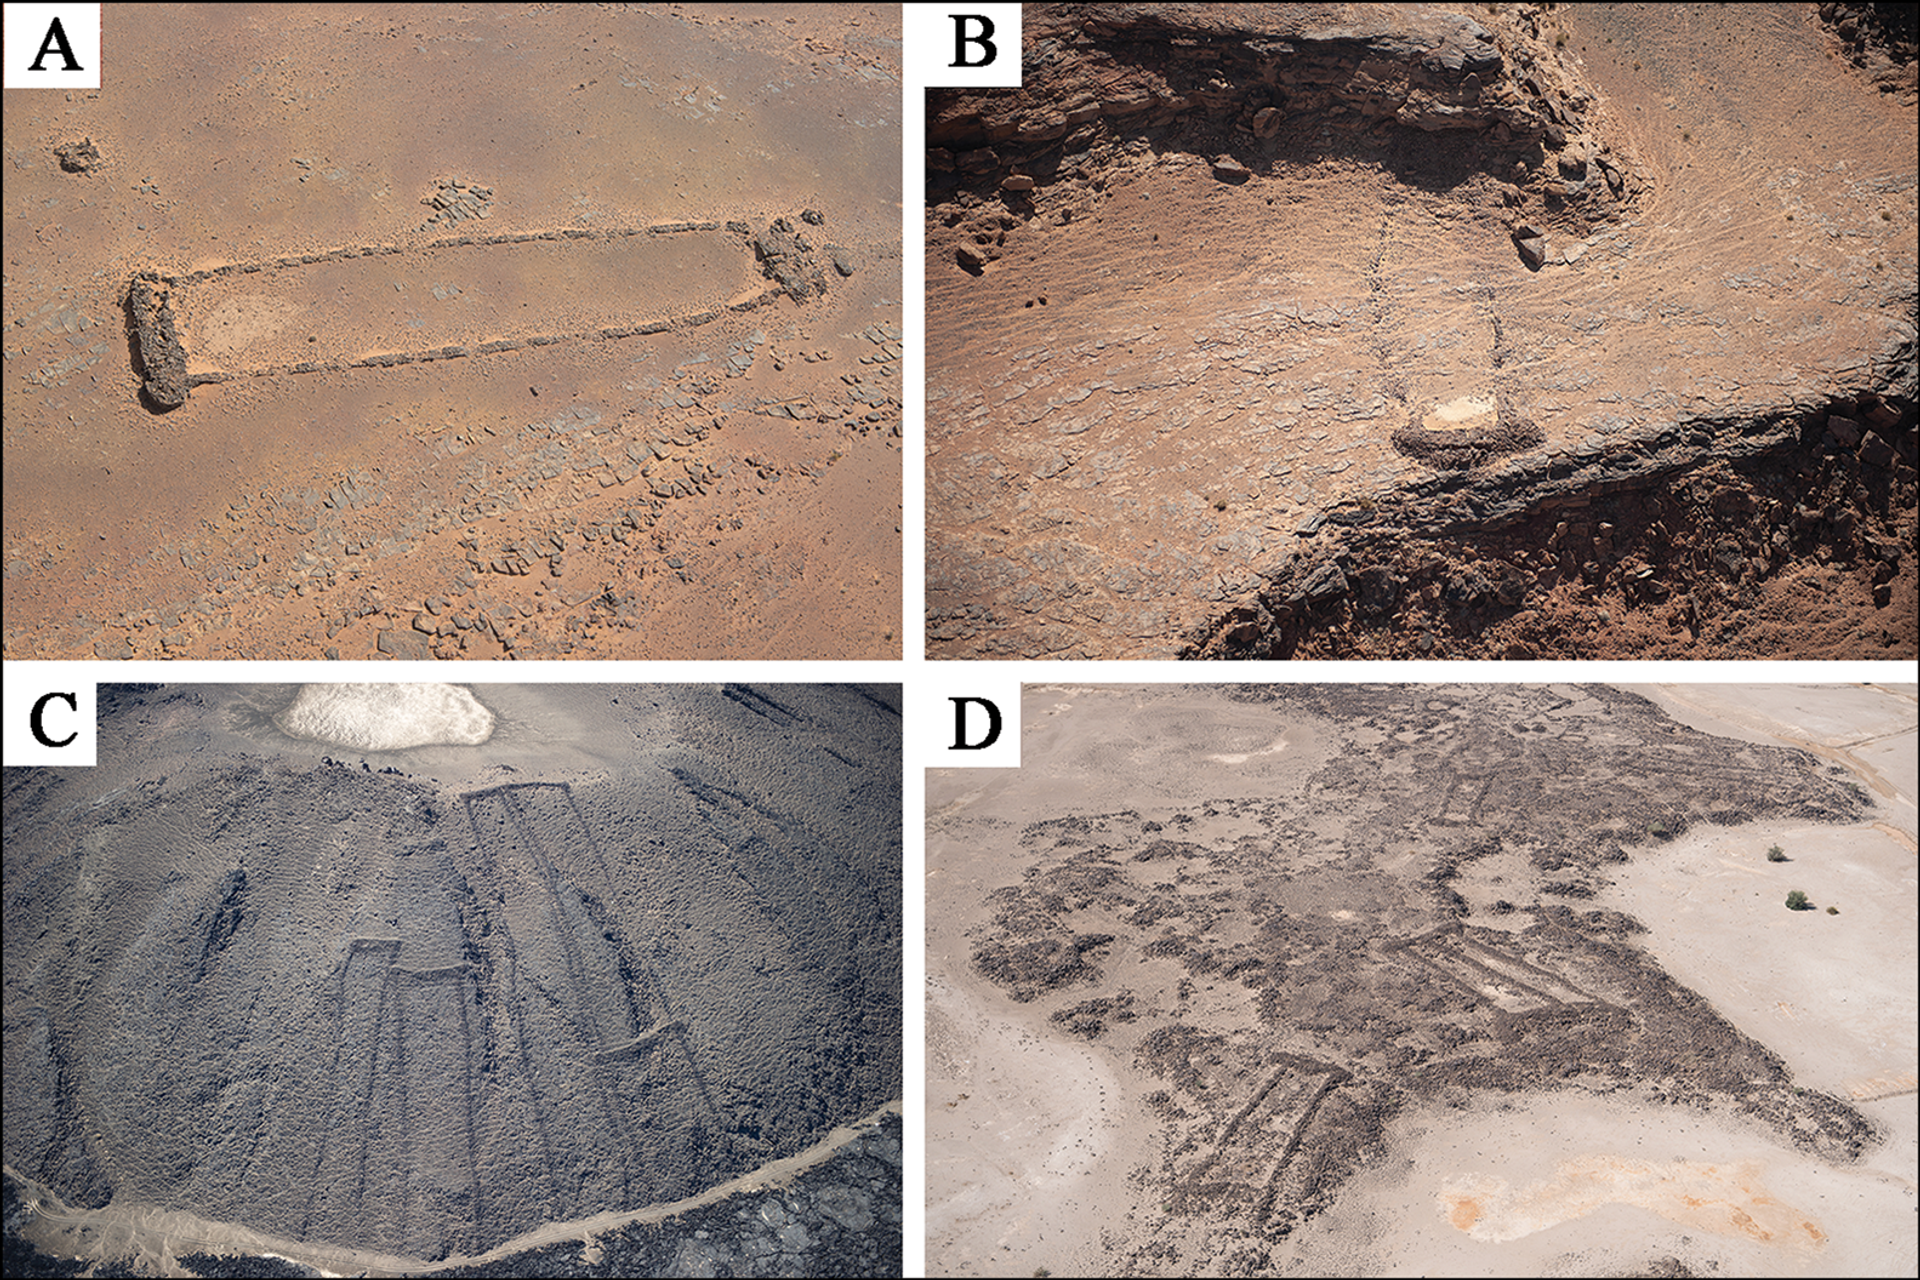 7,000-Year-Old Structures in Saudi Desert Show 'Earliest Evidence for Cattle Cult', Scientists Say - Sputnik International, 1920, 01.05.2021